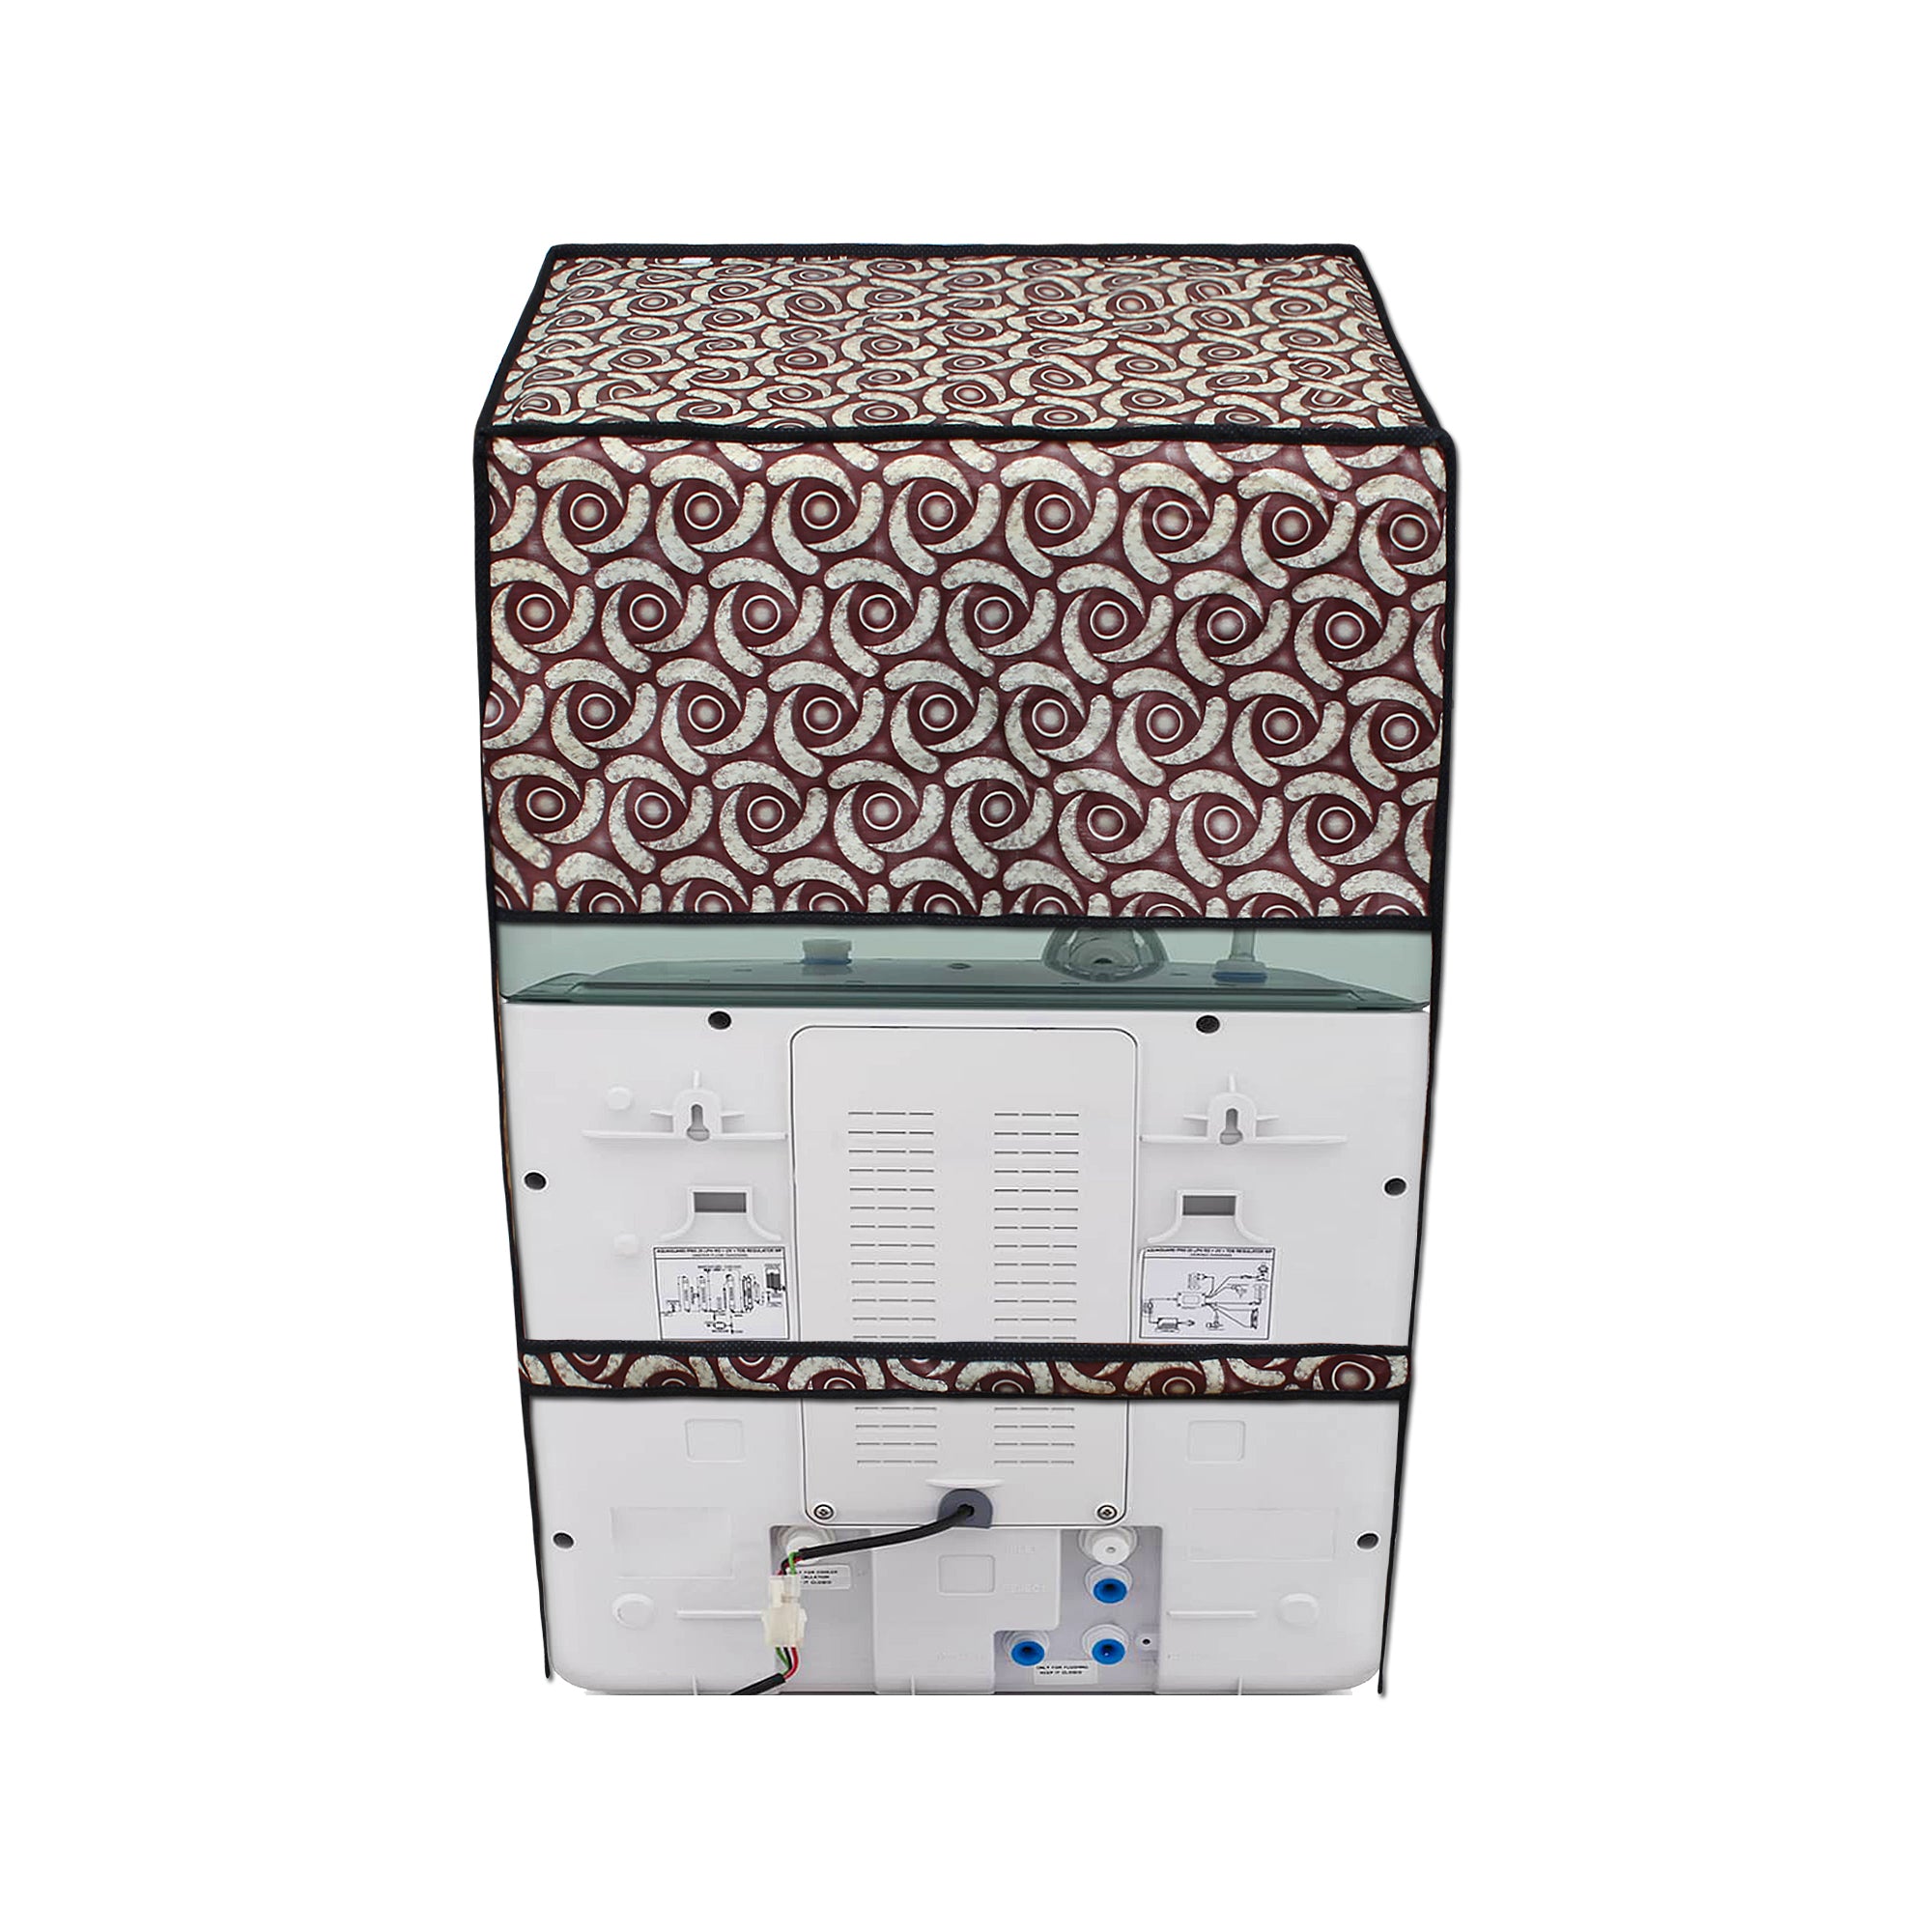 Waterproof & Dustproof Water Purifier RO Cover, SA58 - Dream Care Furnishings Private Limited